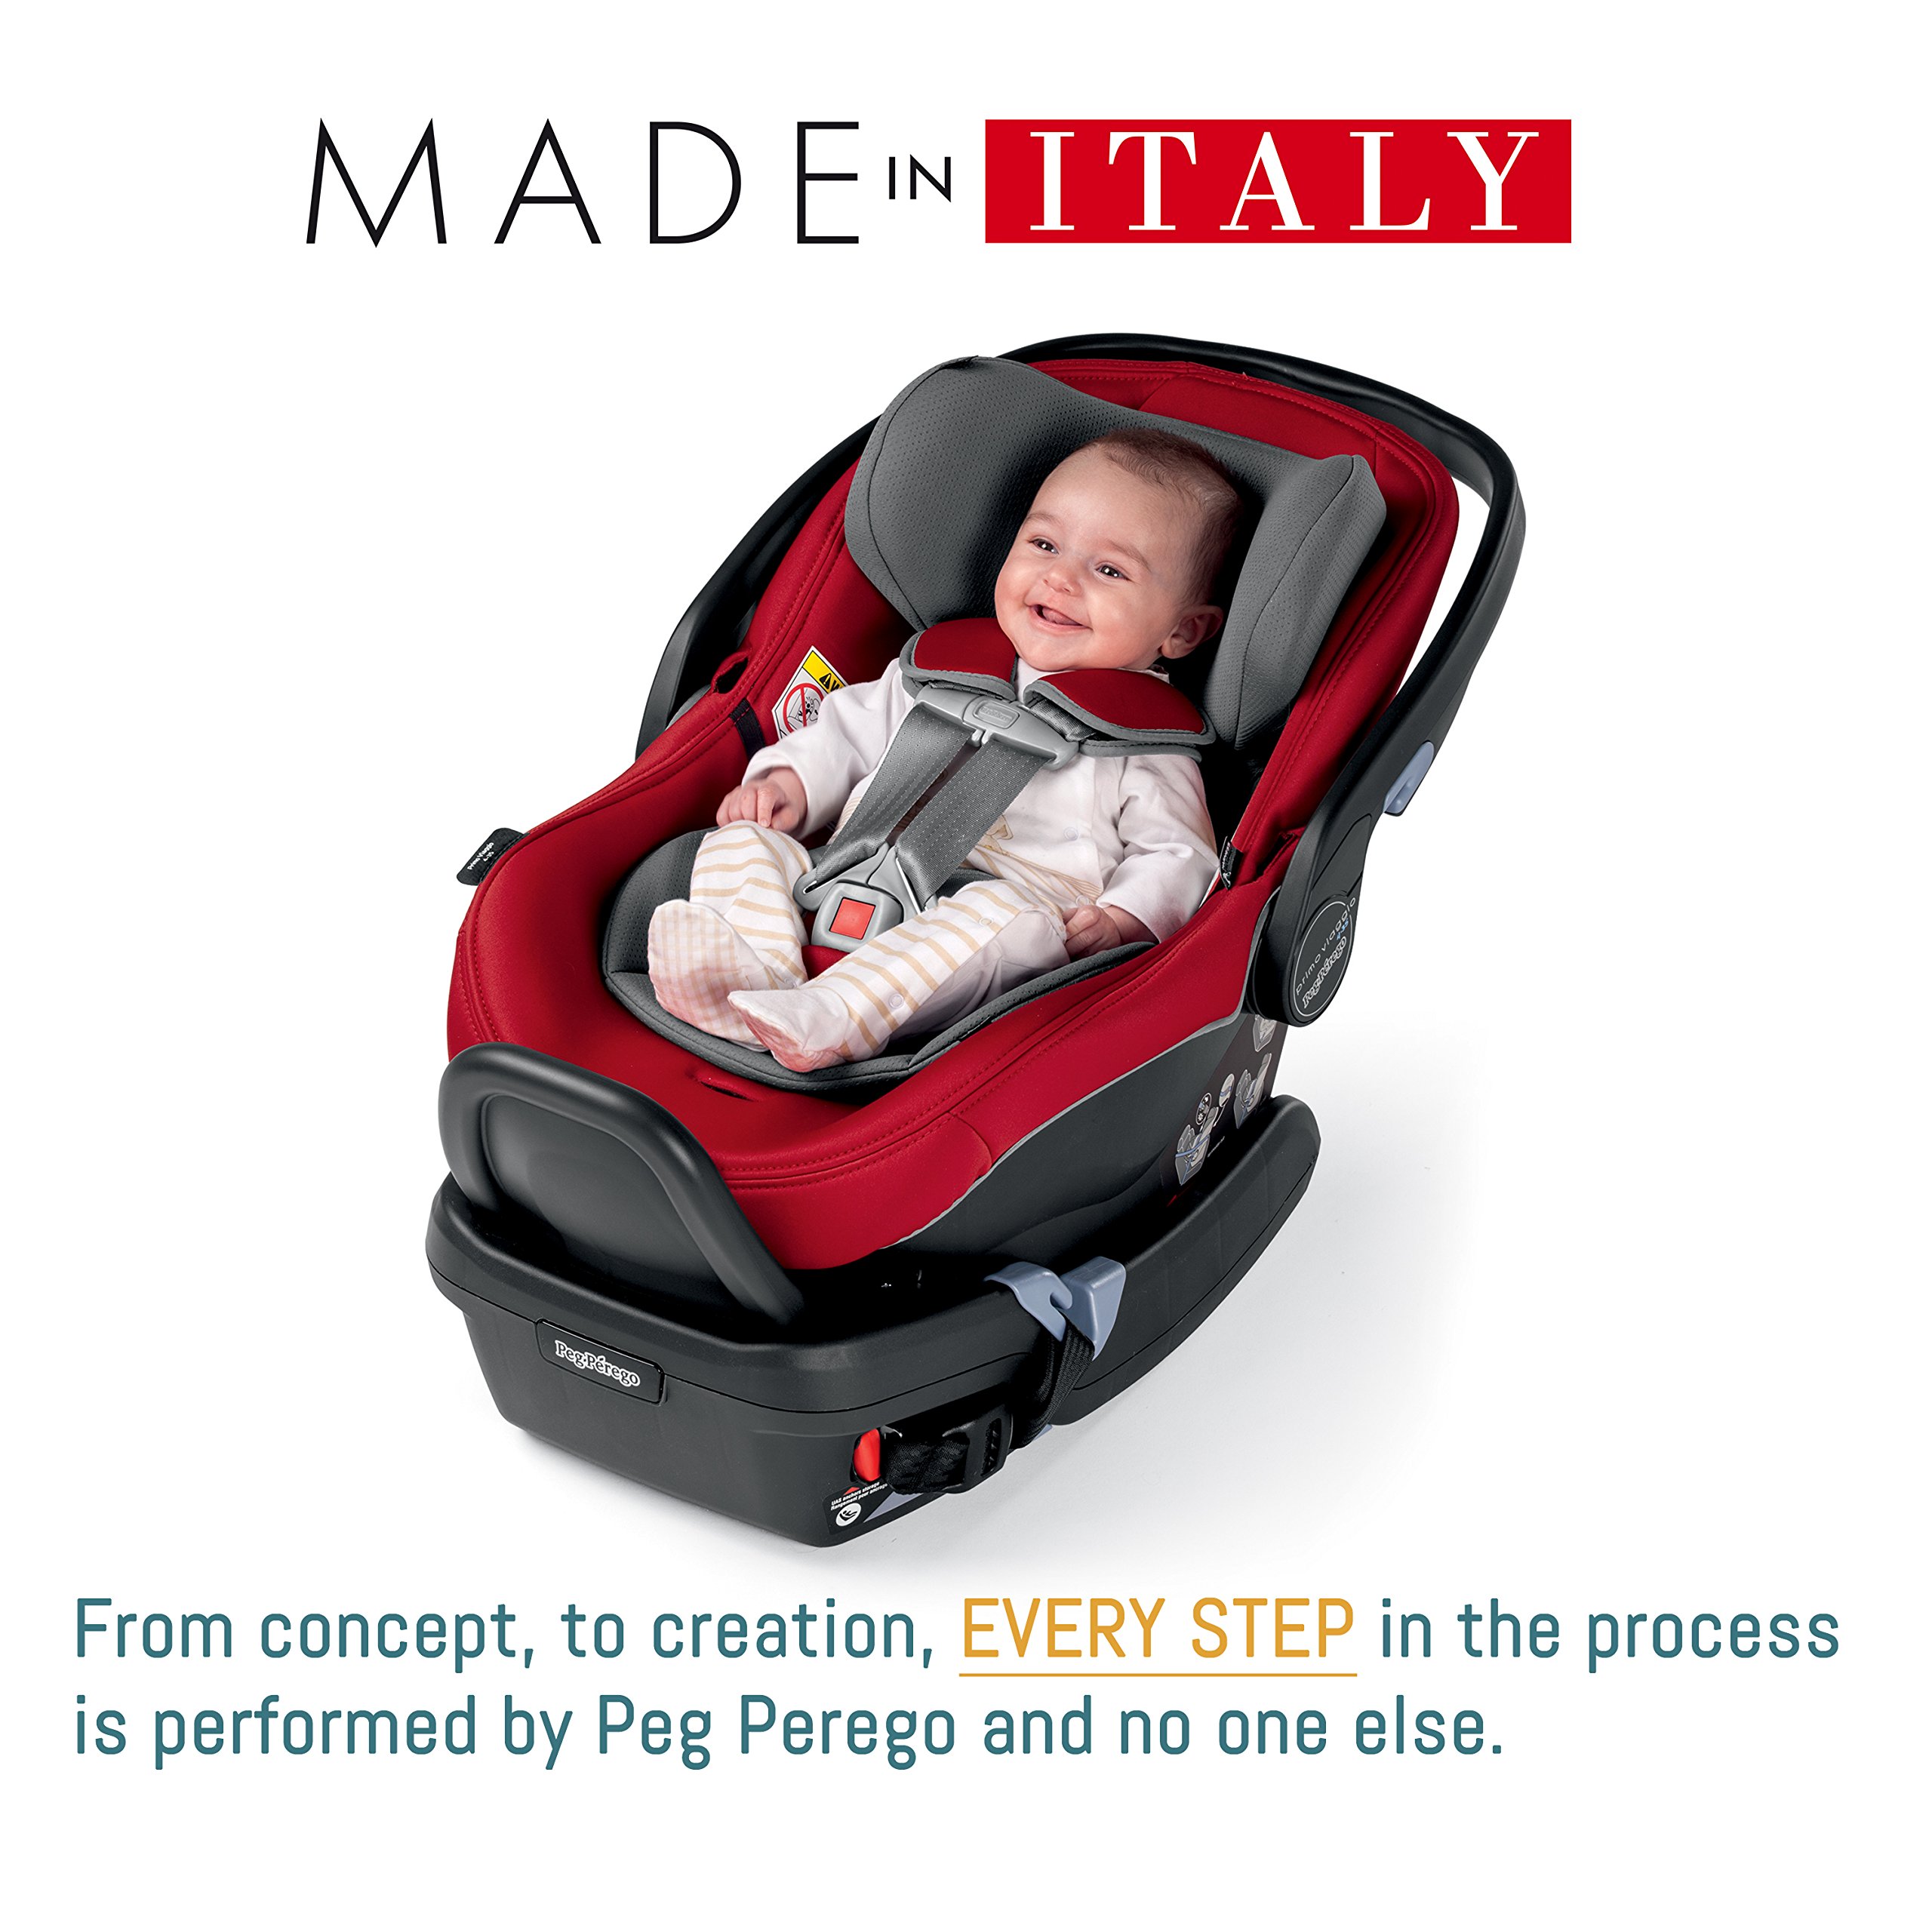 Peg Perego Primo Viaggio 4-35 - Rear Facing Infant Car Seat - for Babies 4 to 35 lbs - Made in Italy - Atmosphere (Grey)